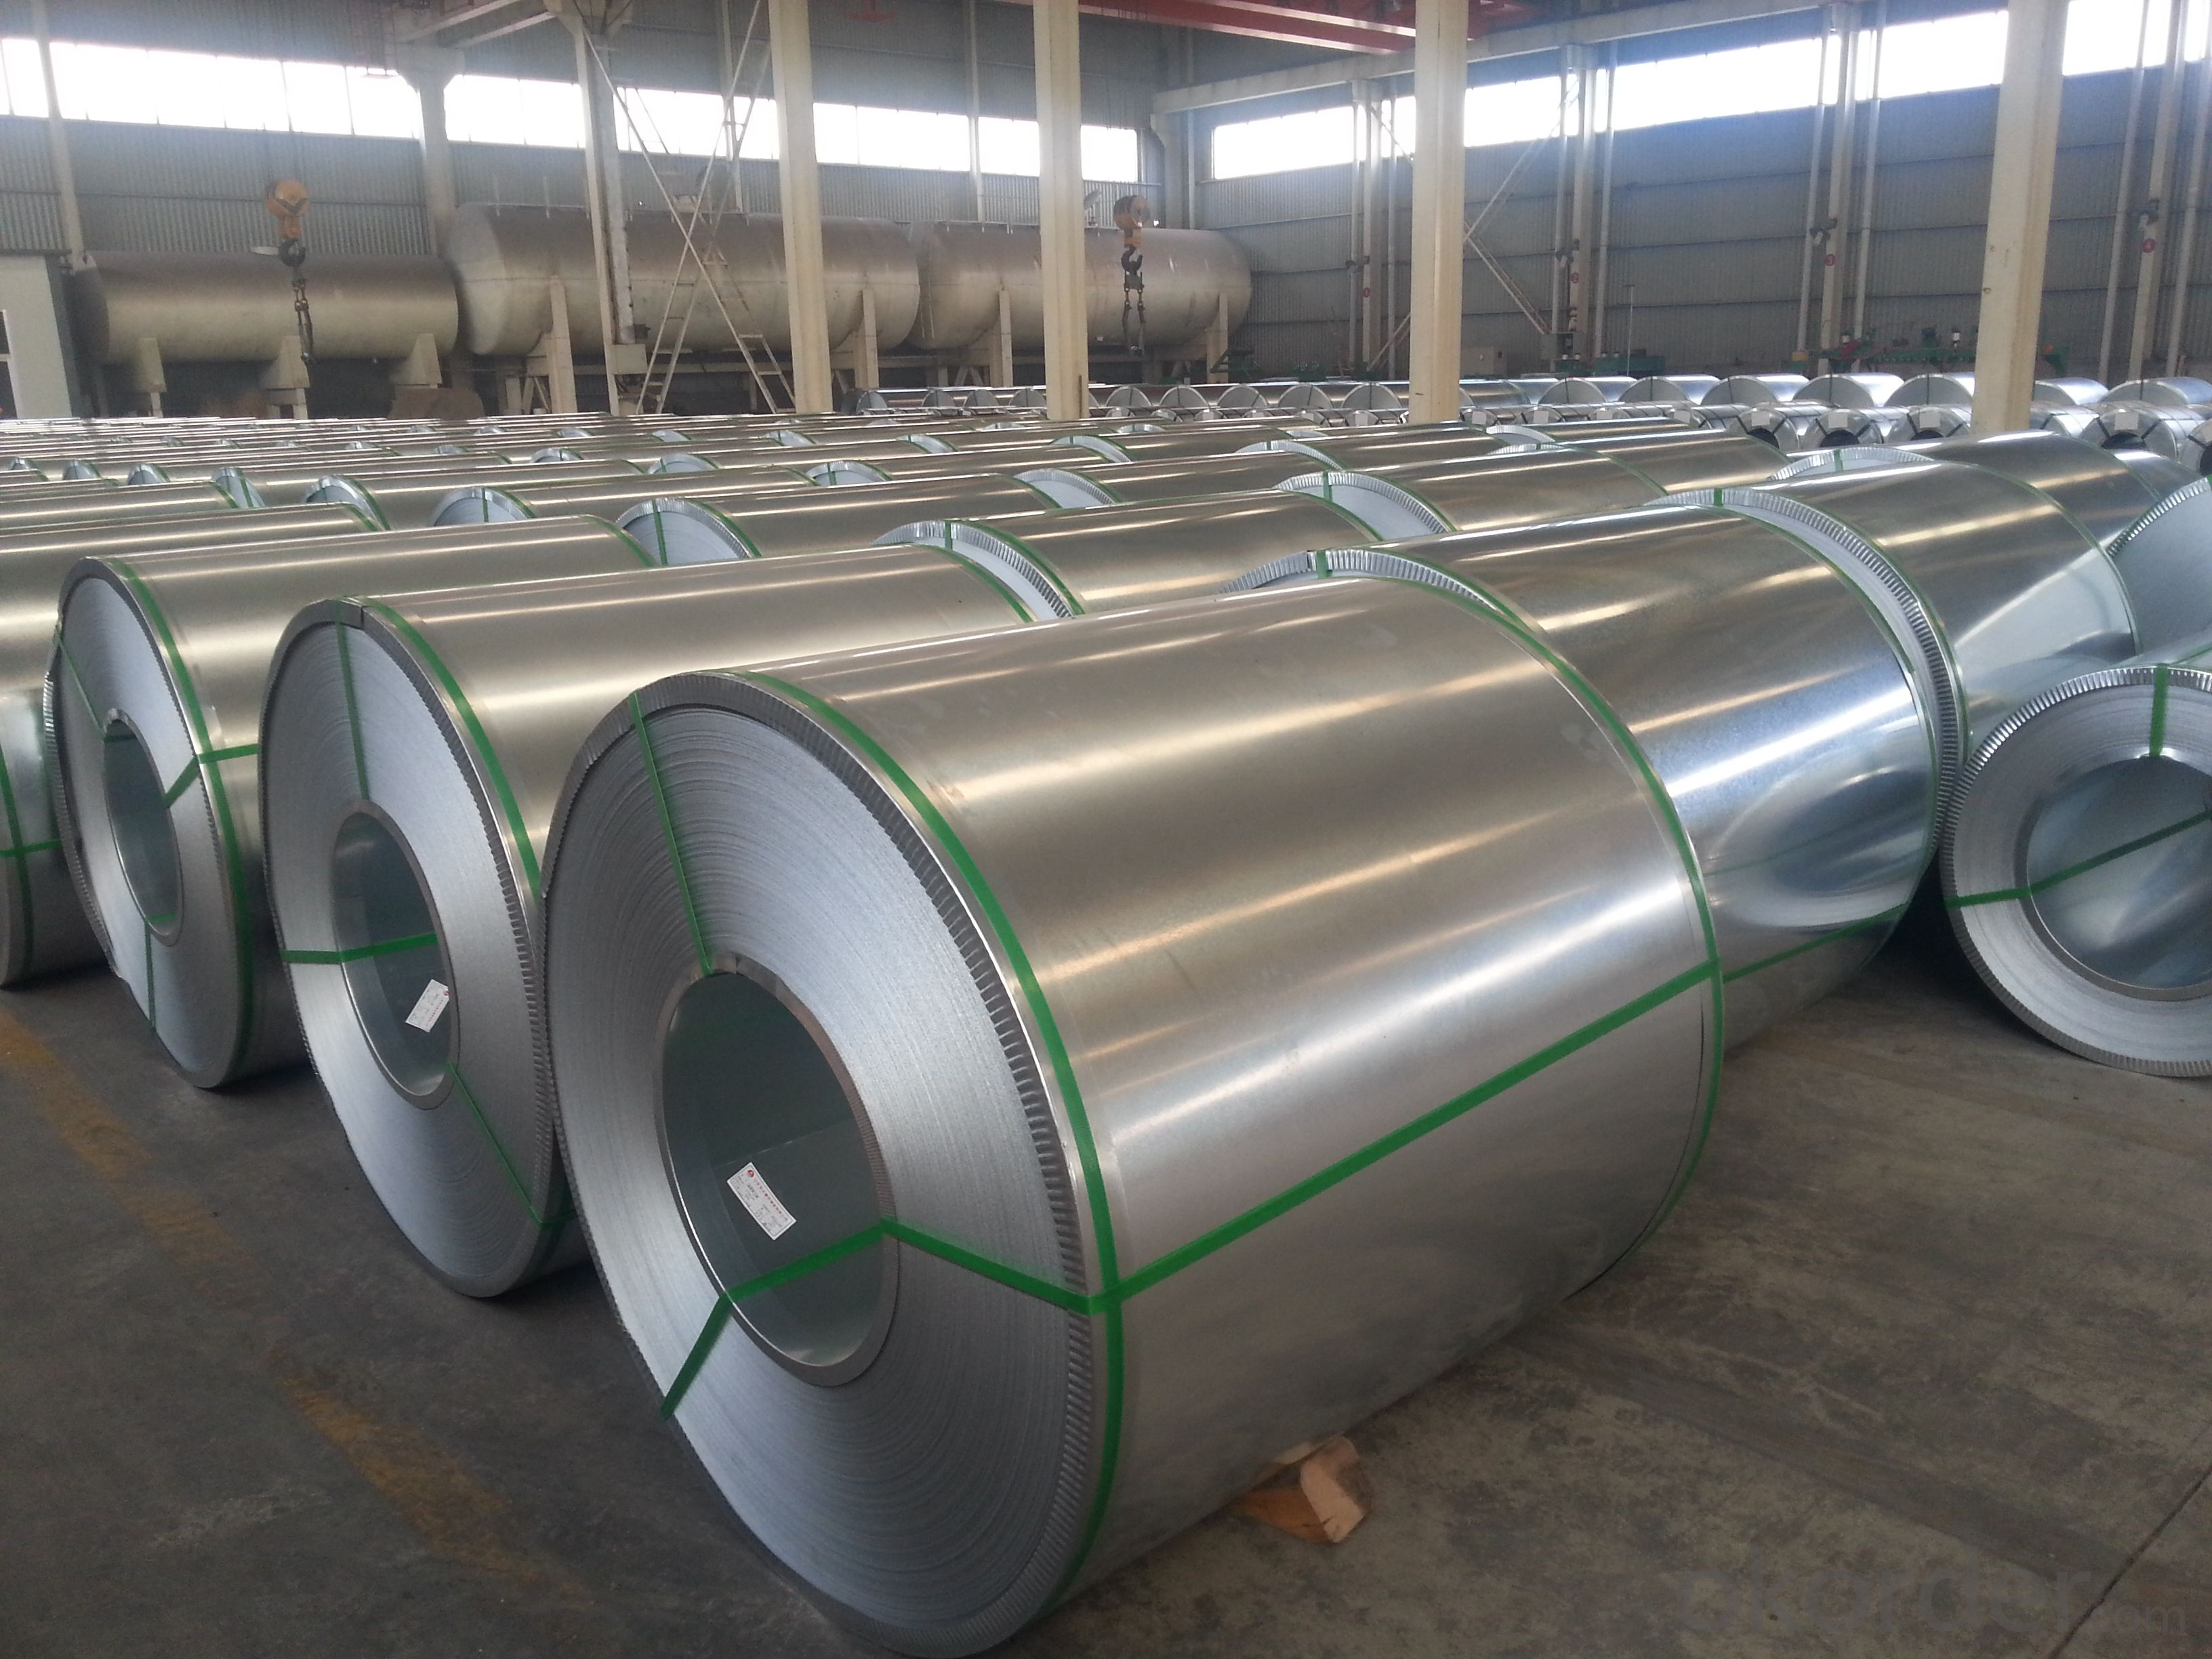 Hot dipped galvanized steel coils/Sheets realtime quotes, lastsale prices.